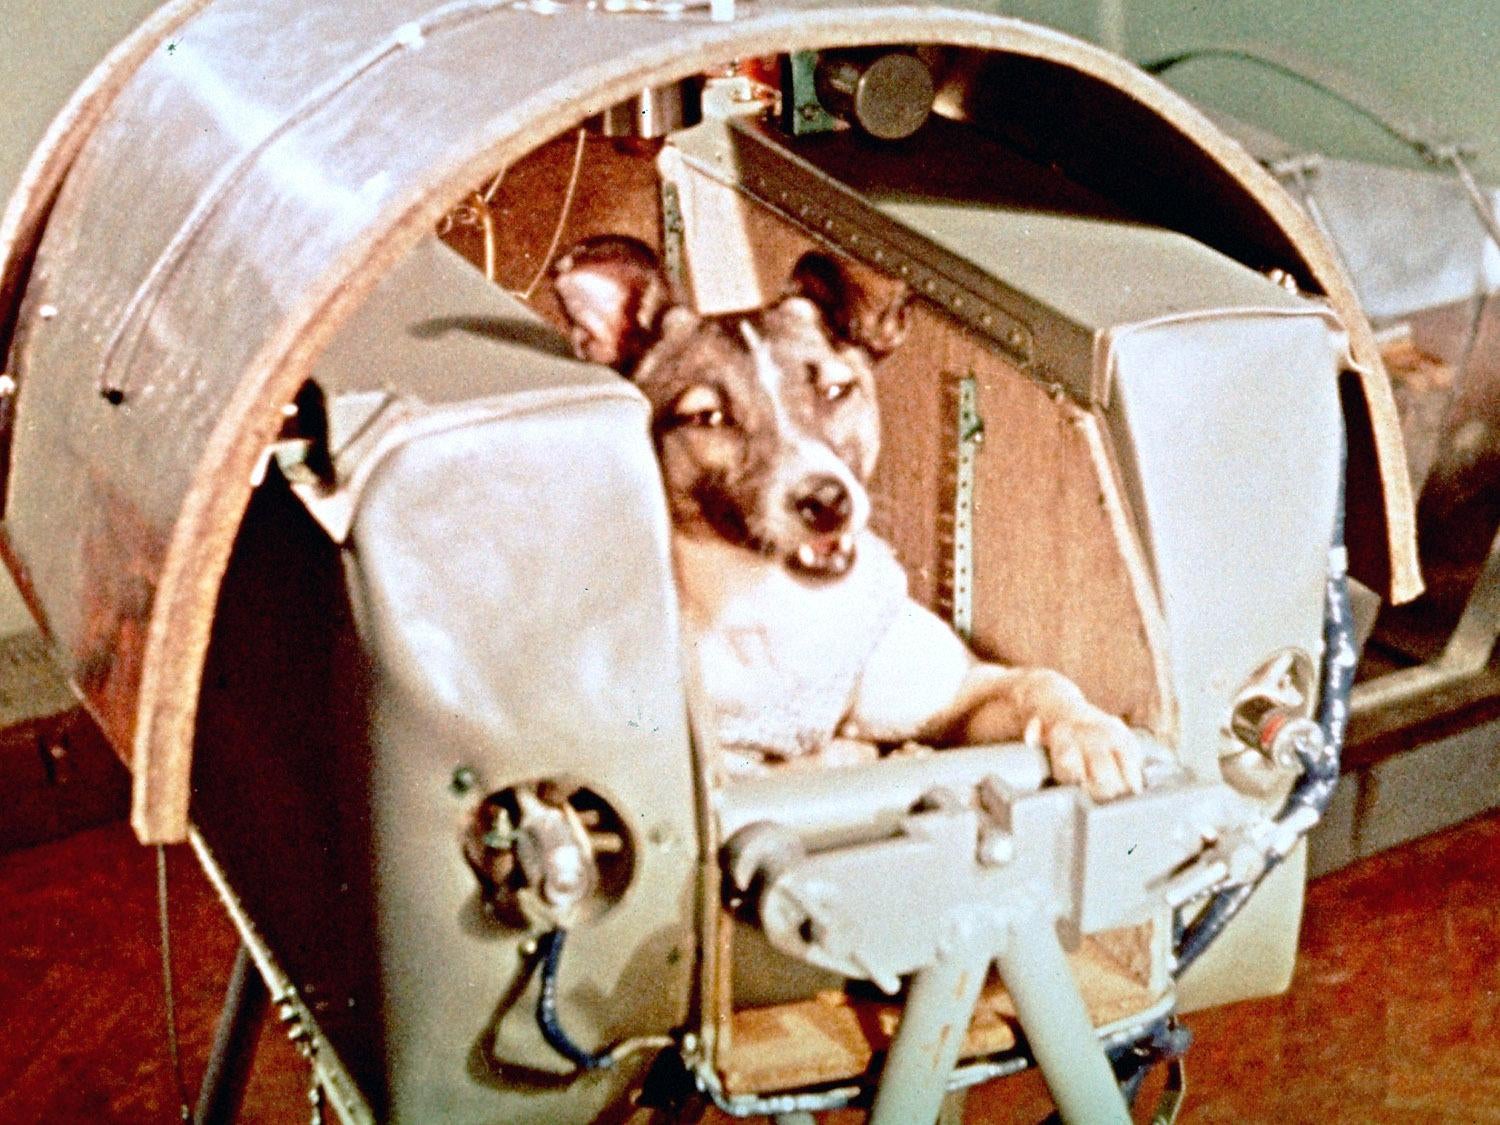 Laika aboard the Sputnik 2 capsule prior to launch in 1957. (Photo: Copyright 1957 The Associated Press, AP)